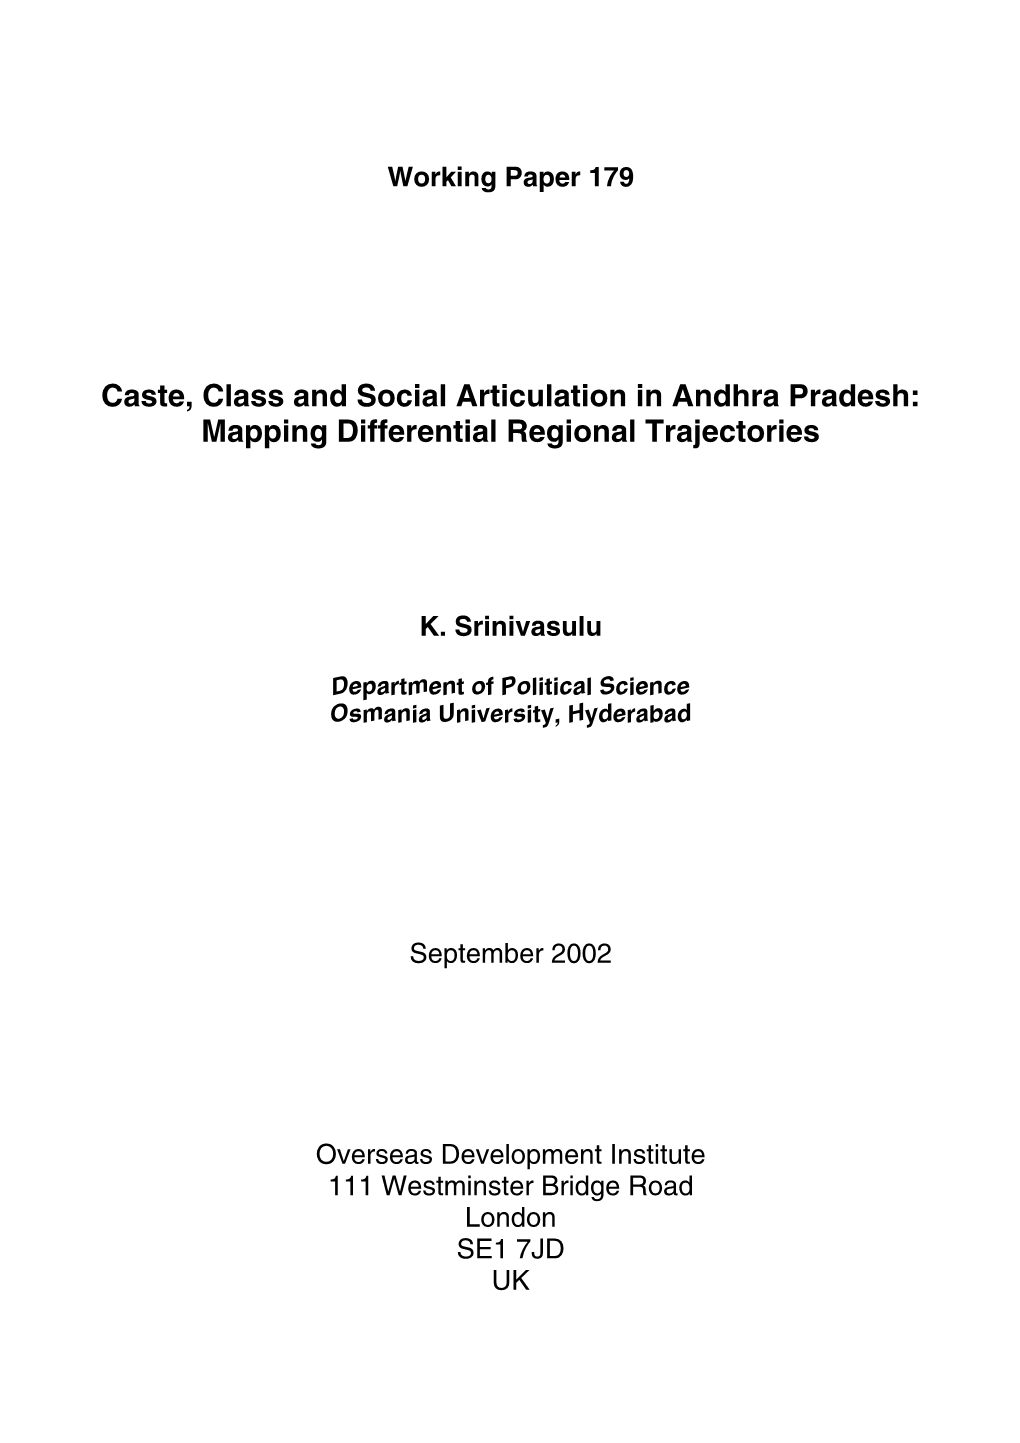 Caste, Class and Social Articulation in Andhra Pradesh: Mapping Differential Regional Trajectories